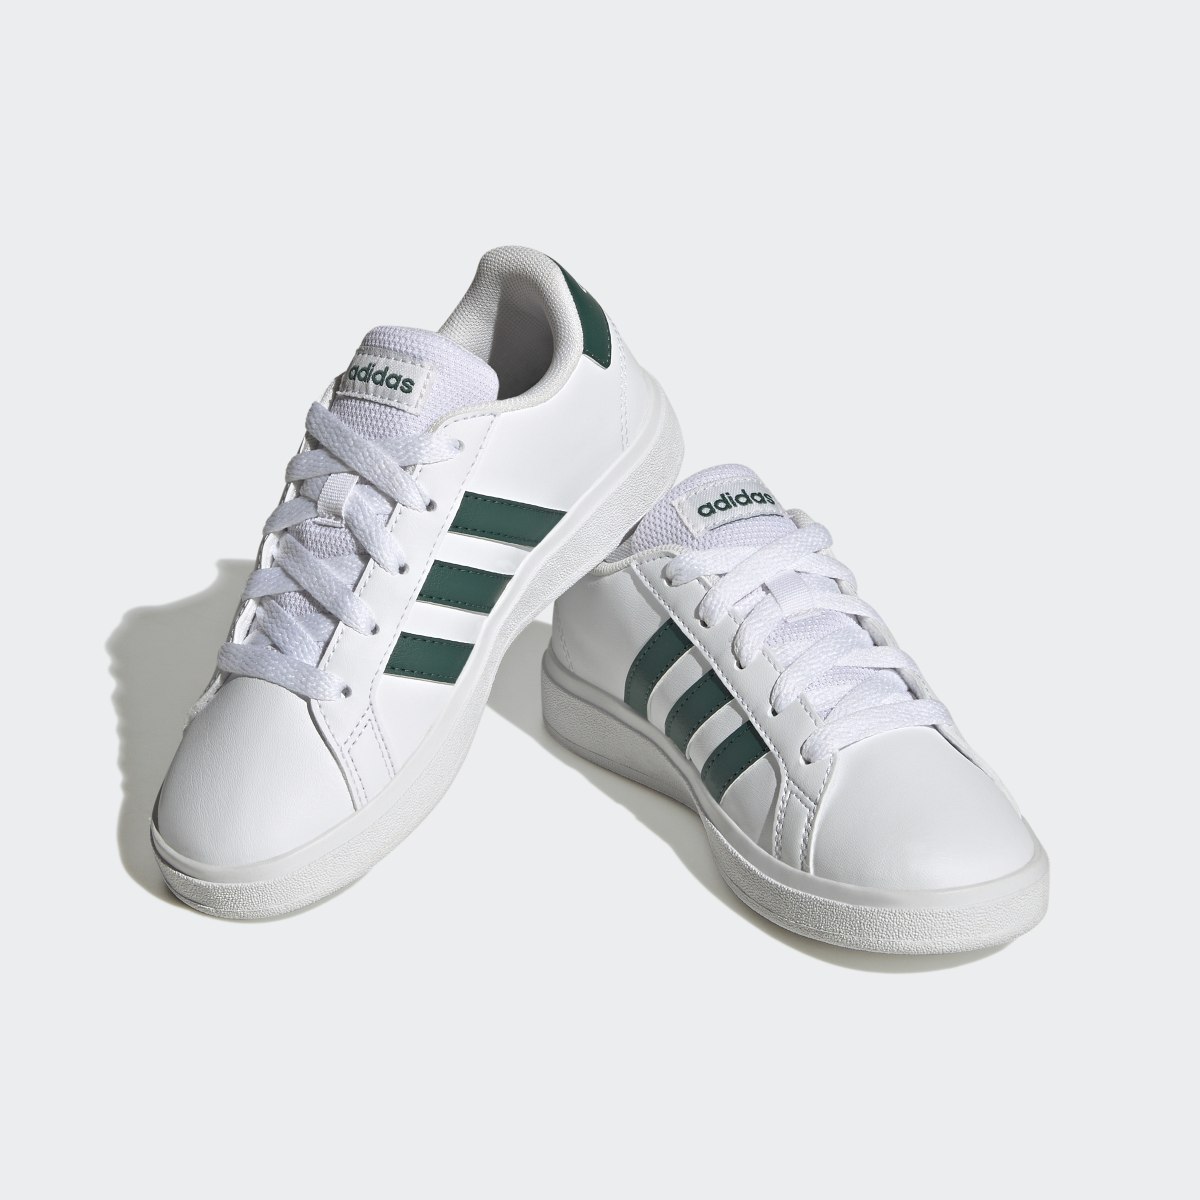 Adidas Grand Court Lifestyle Tennis Lace-Up Shoes. 5